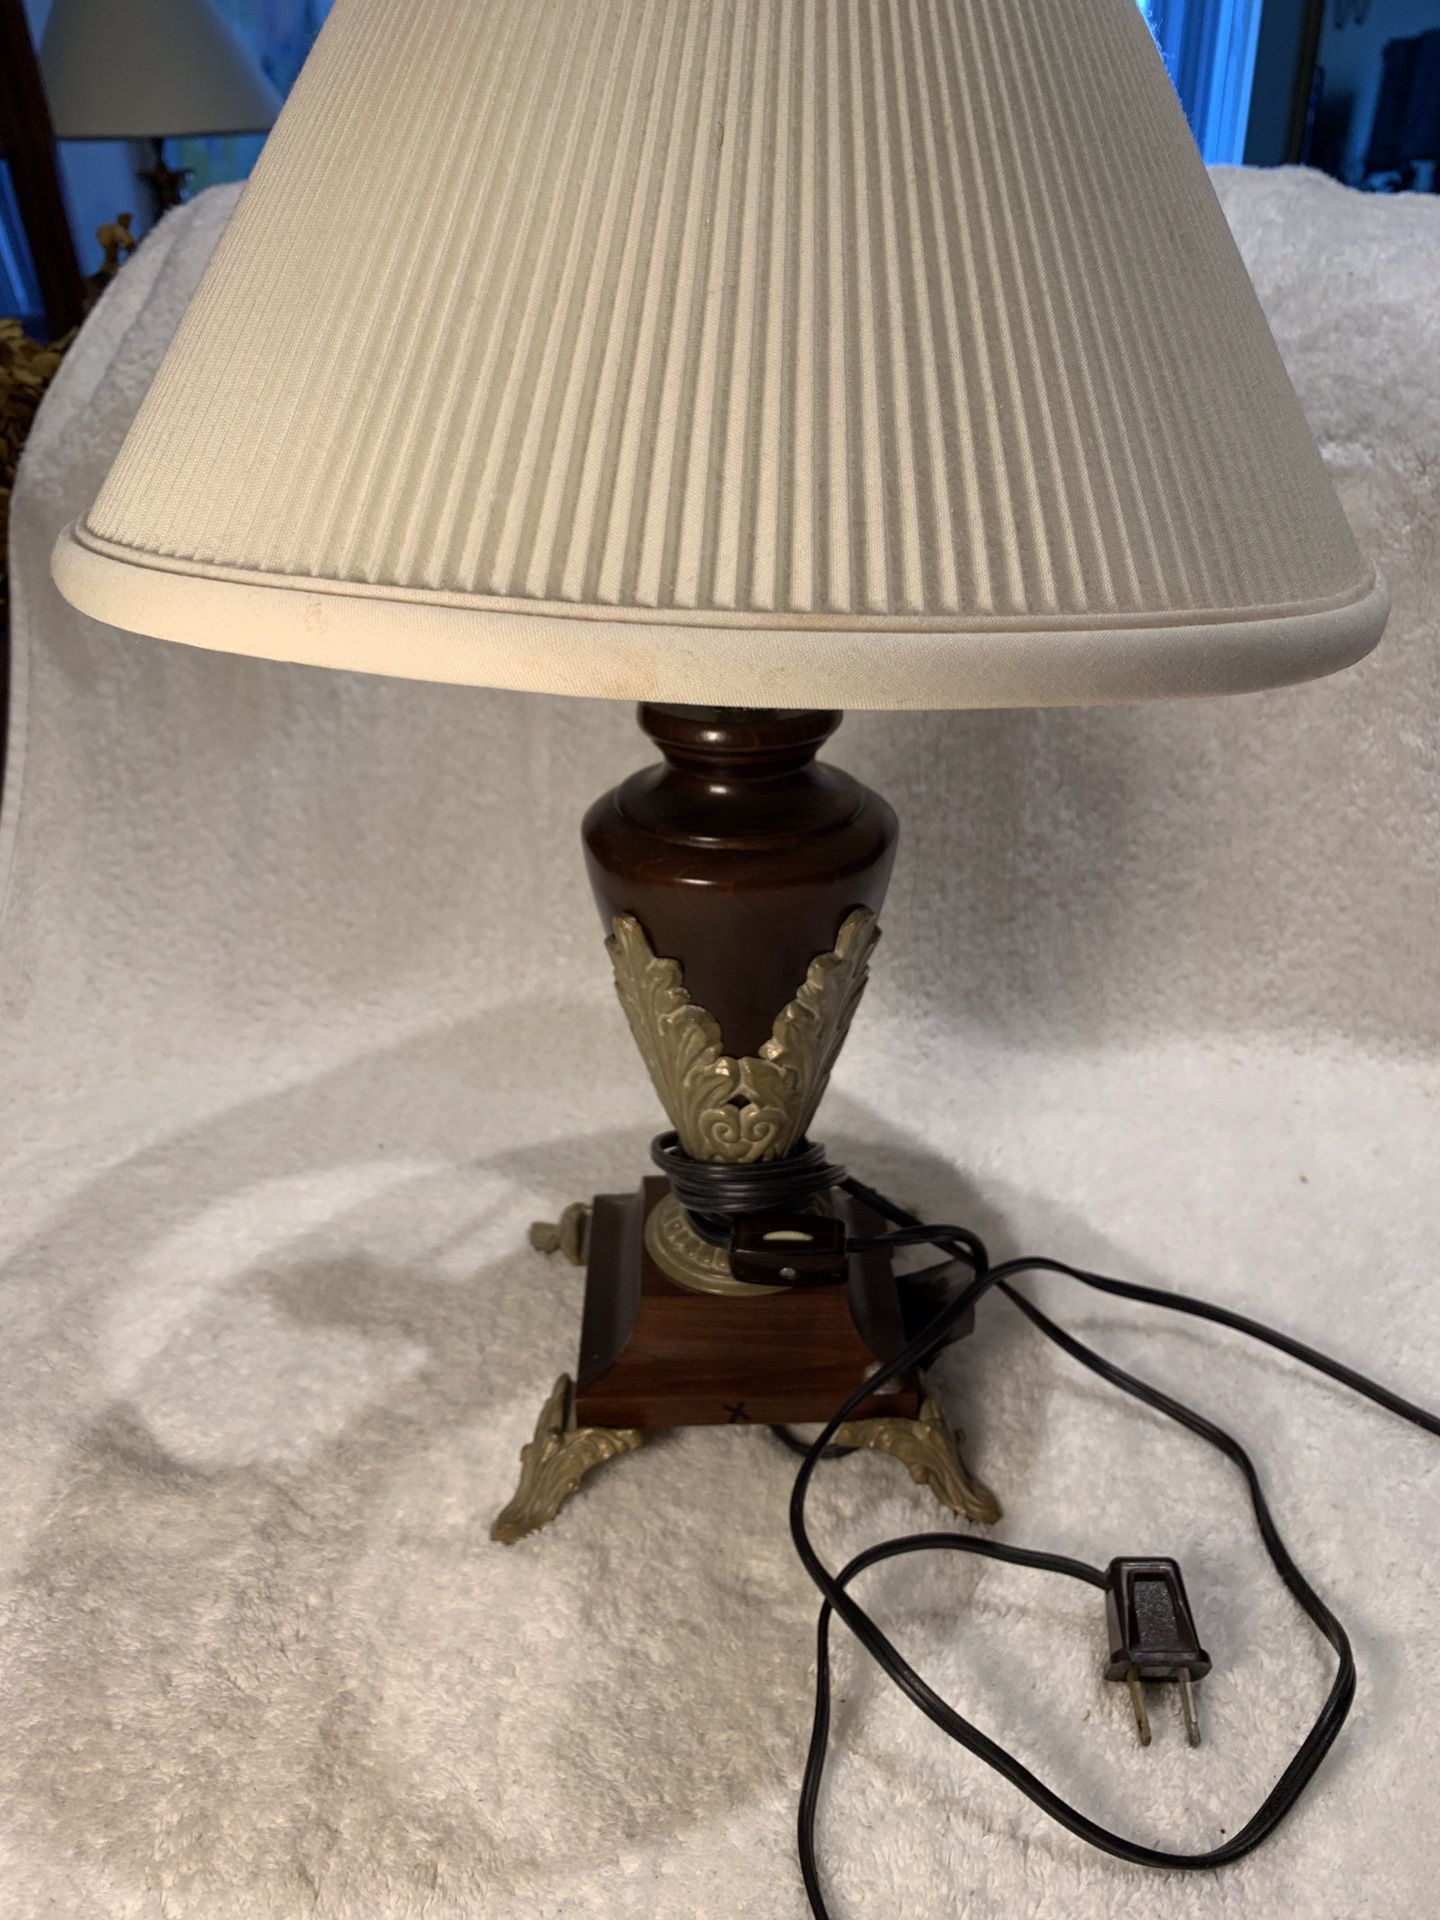 Small vintage table lamp